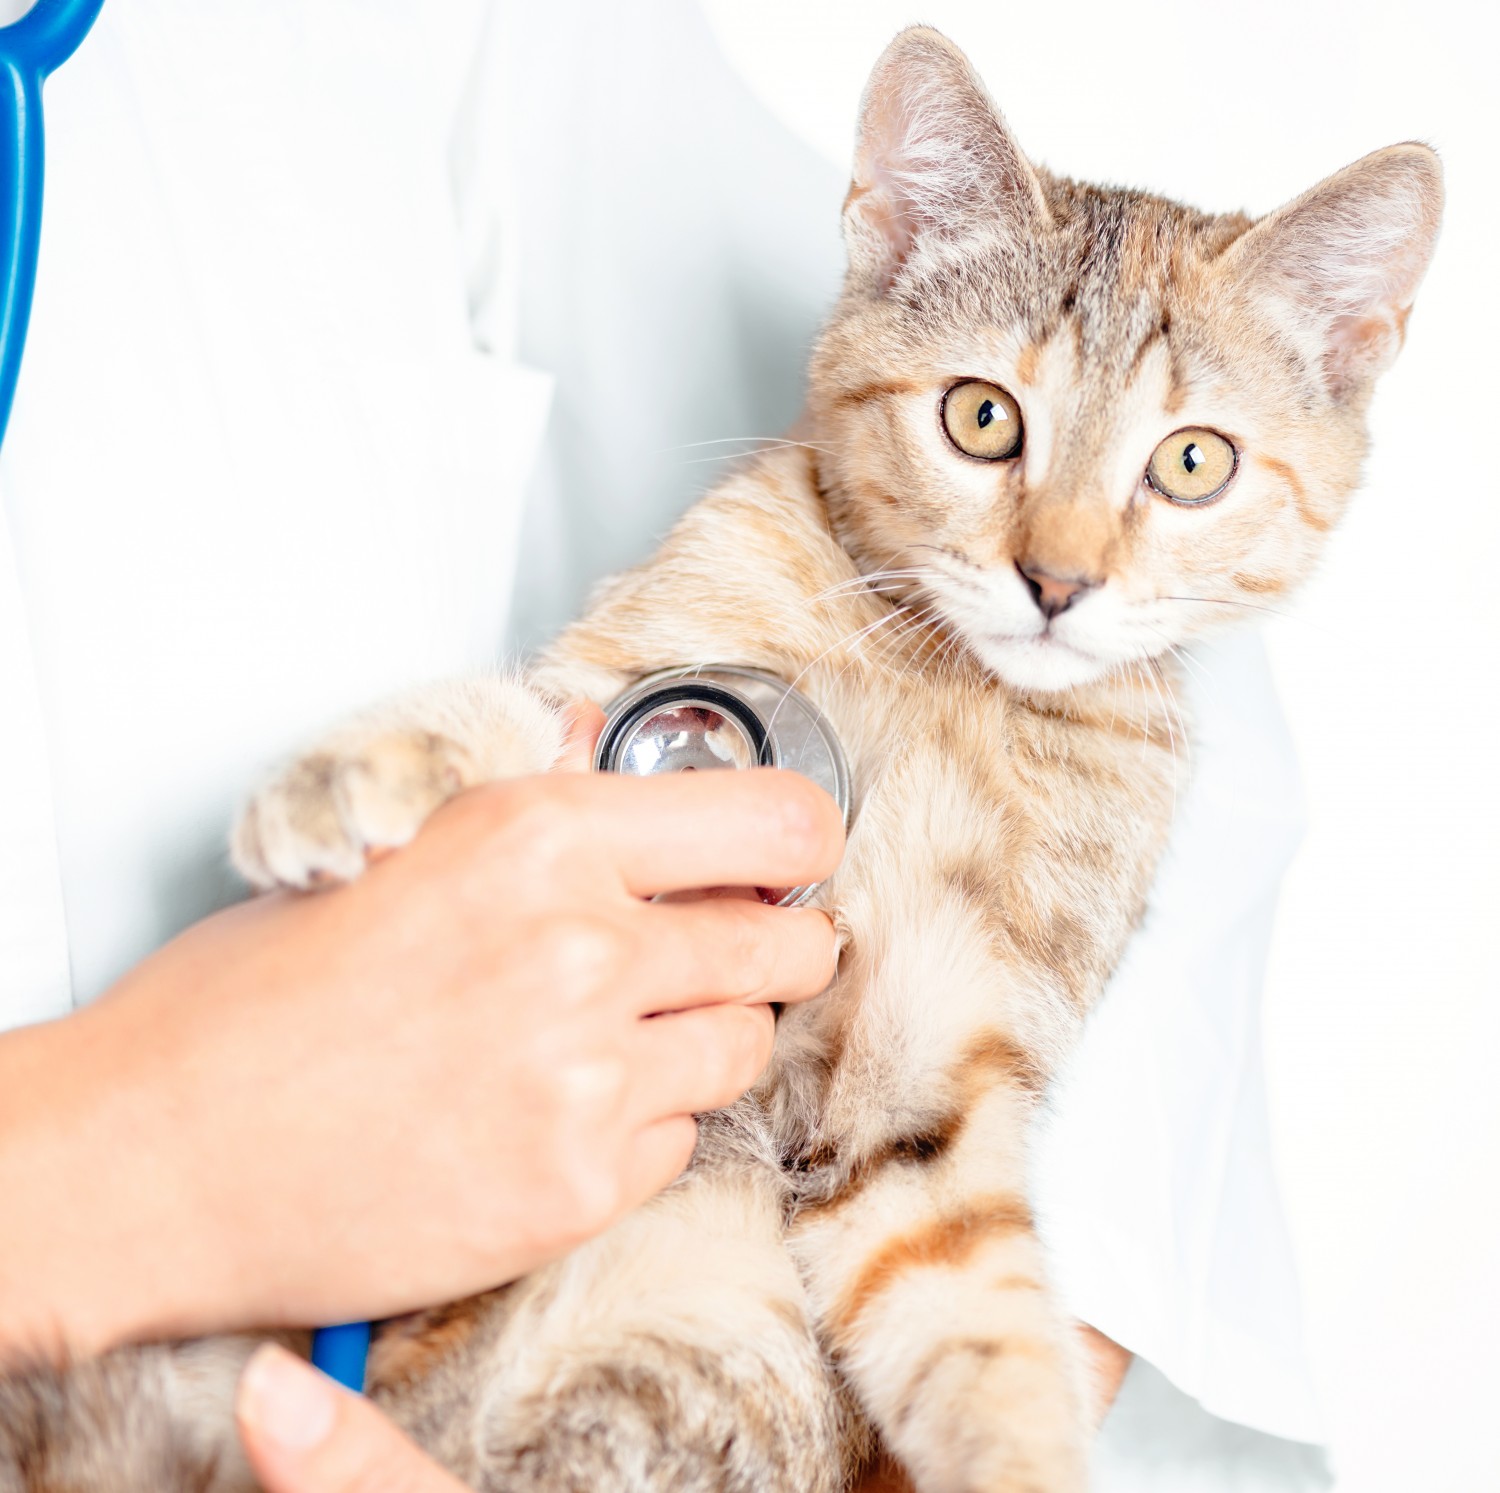 Cat Being Monitored With a Stethoscope